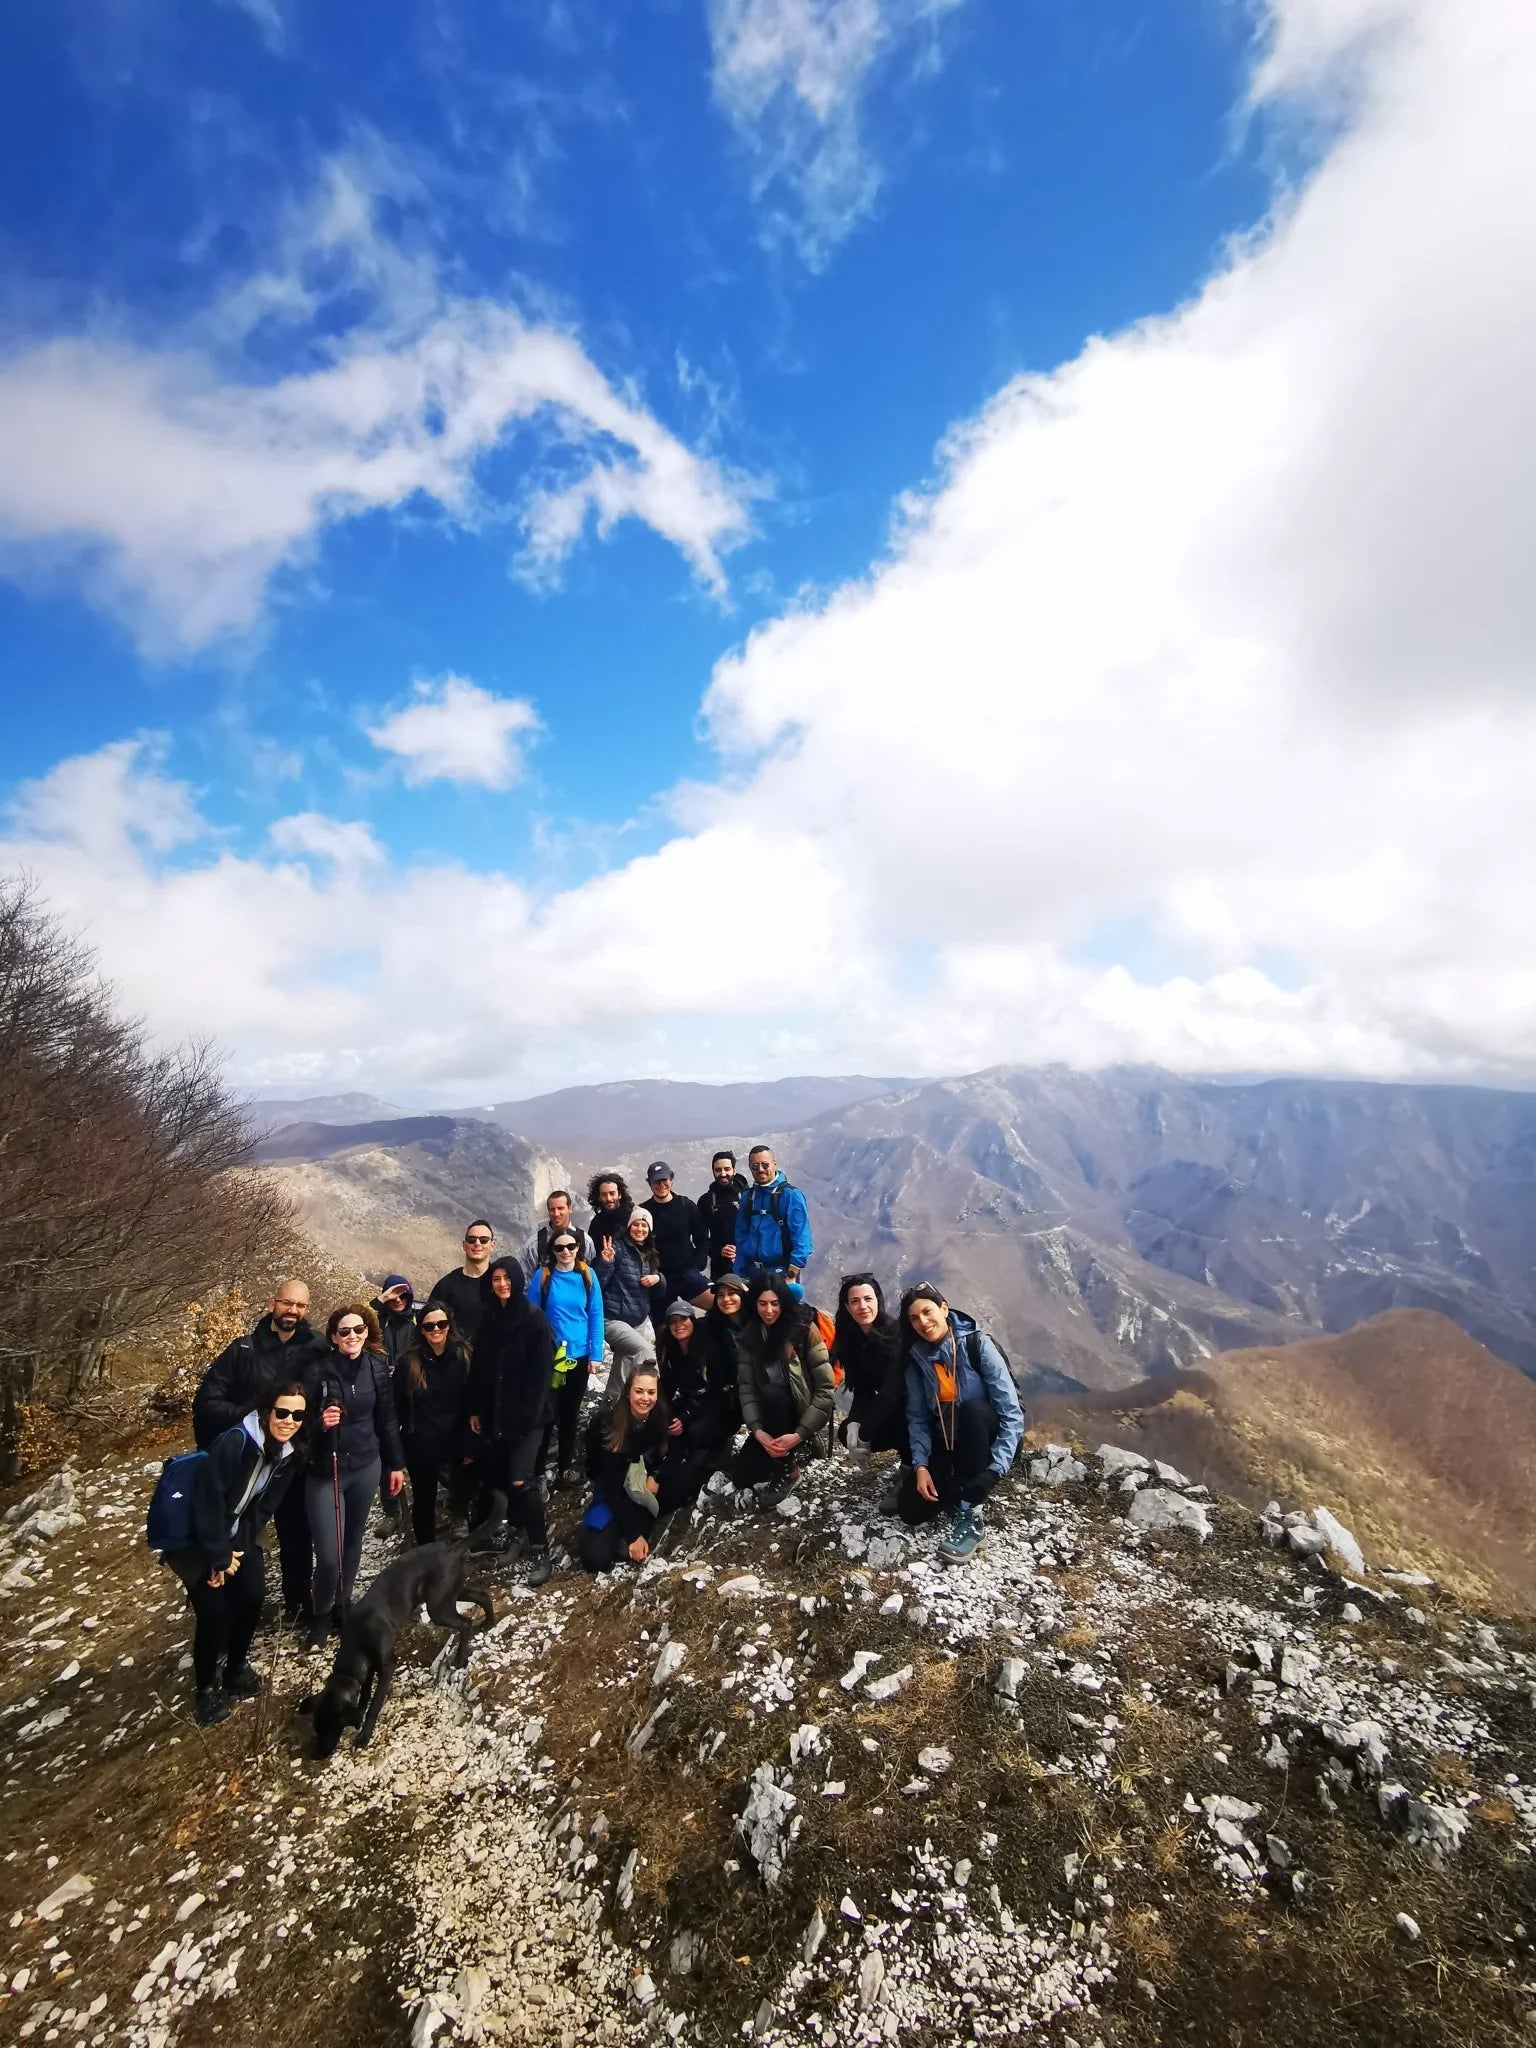 Trekking Campo dell’osso - Discover Experience